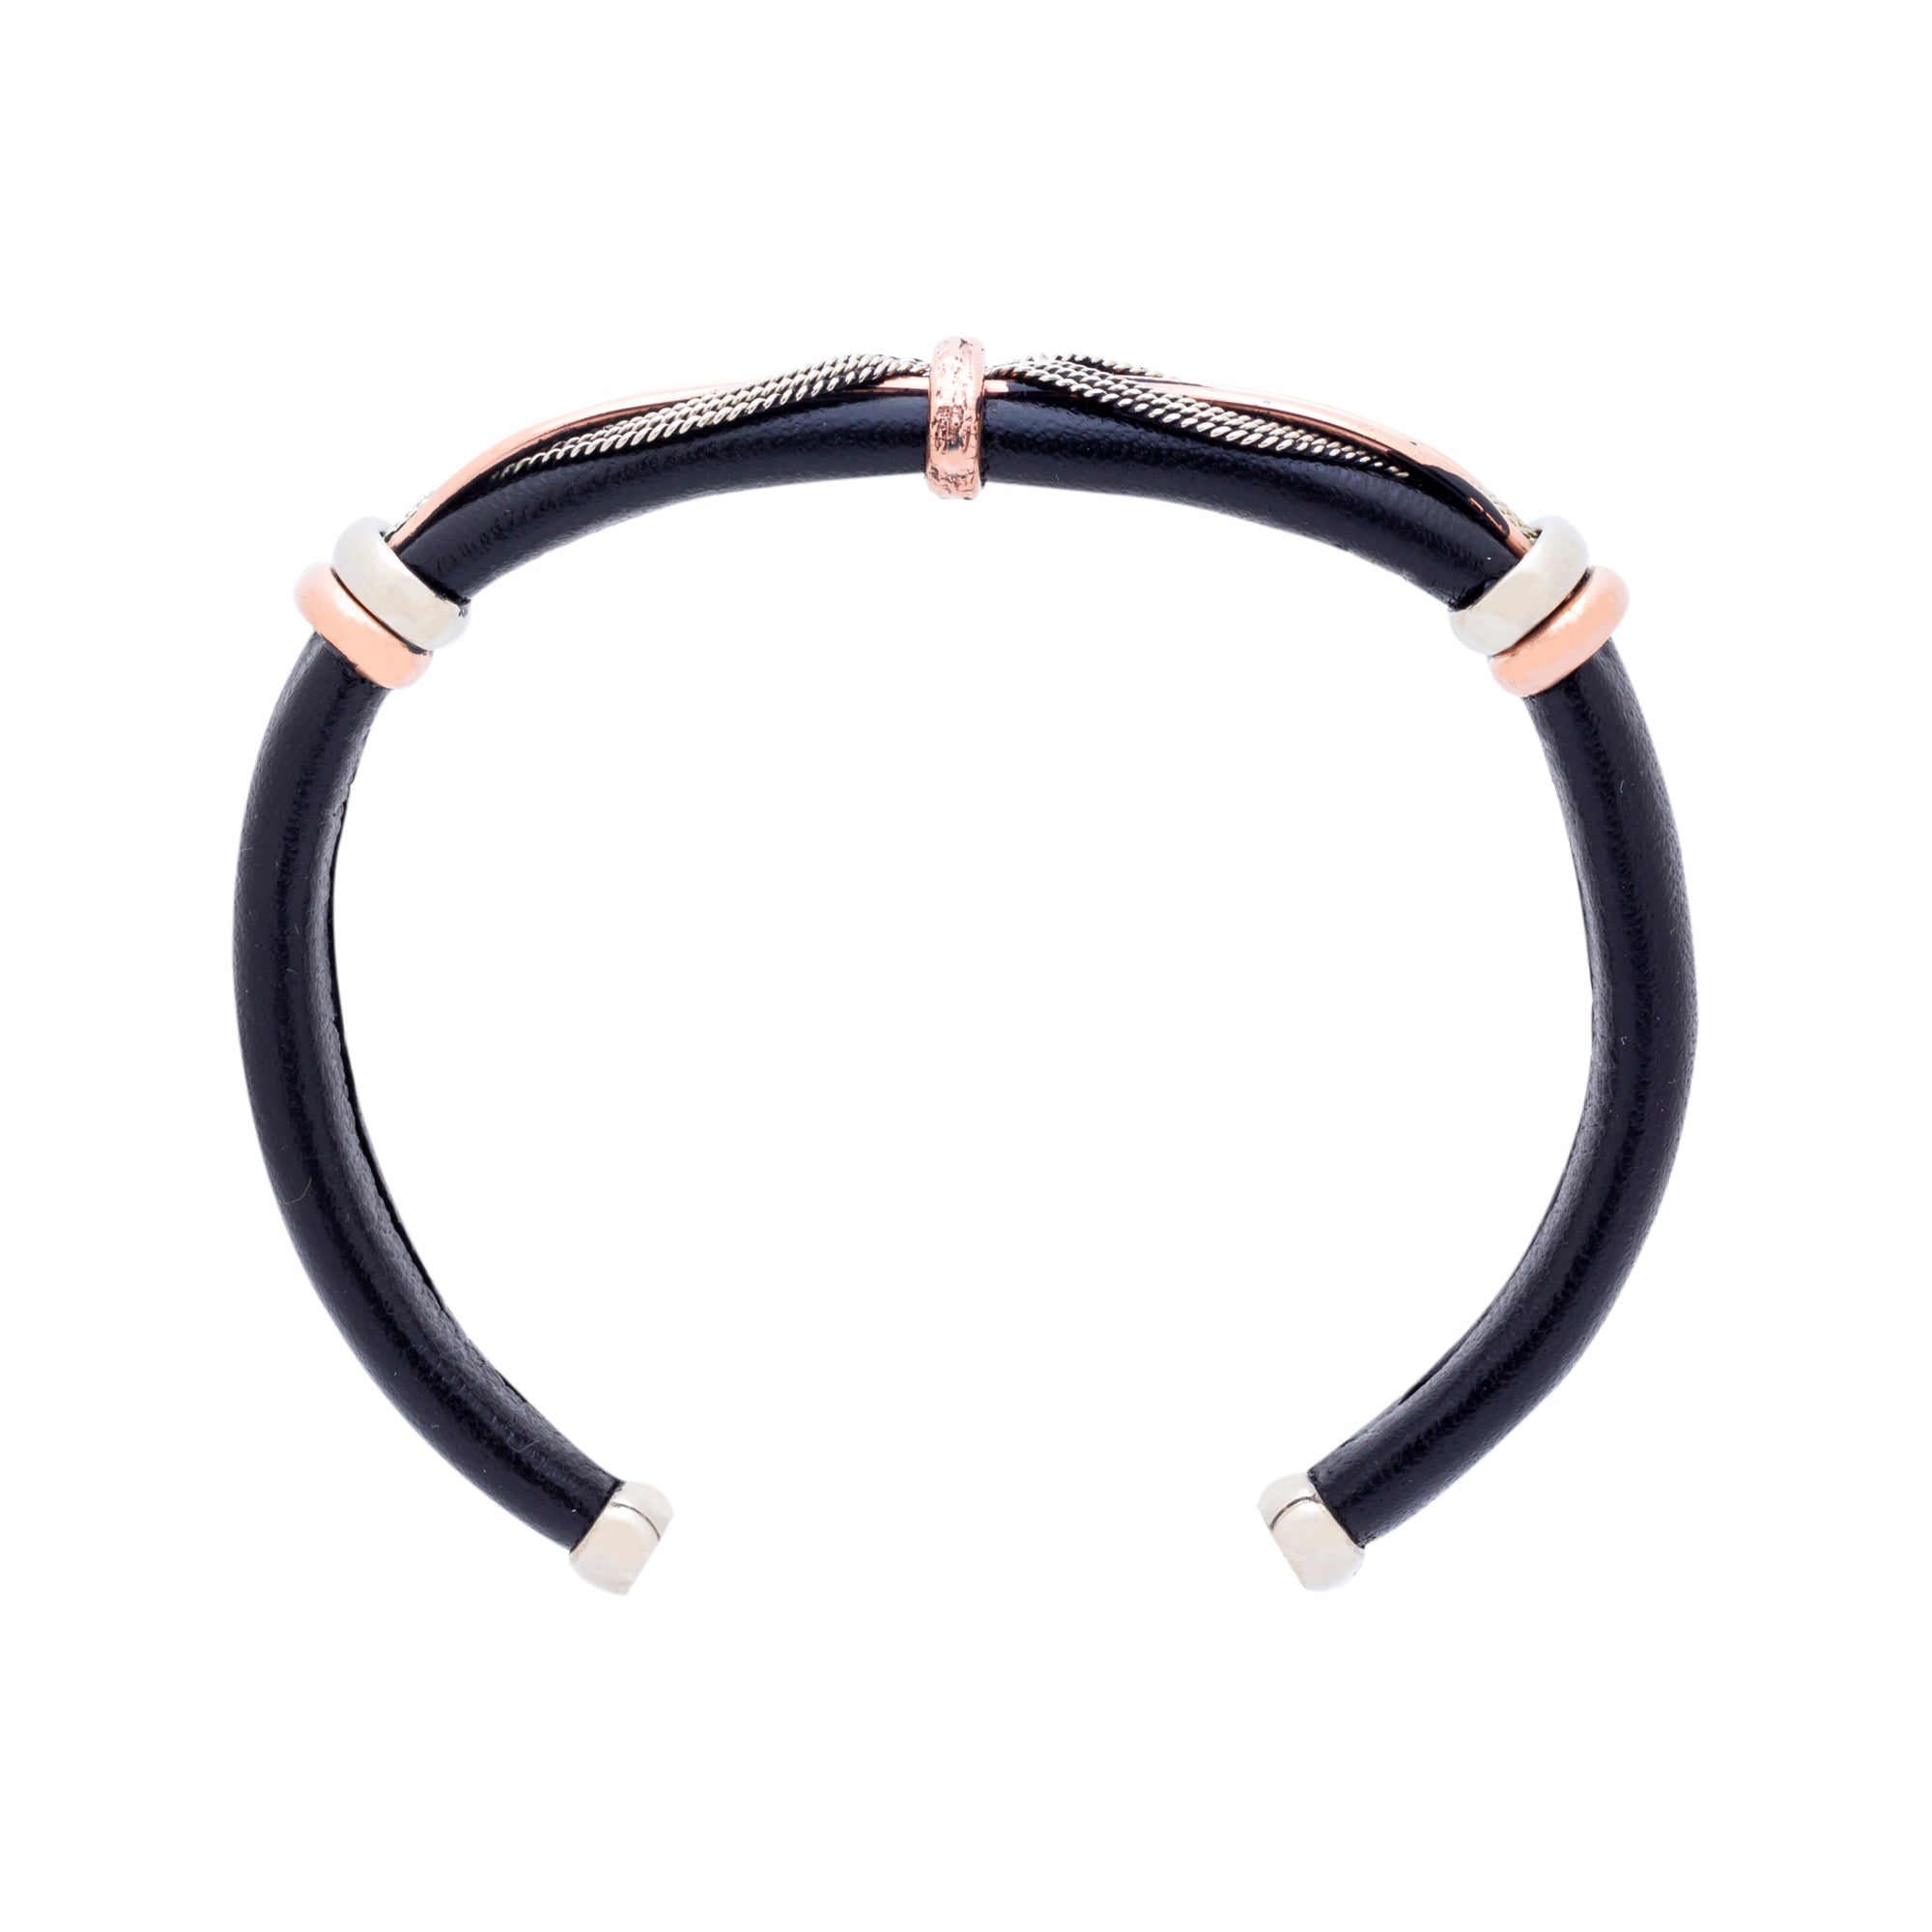 Leather Bracelet BR.ULB.0106 - Handcrafted by HPSilver, LLC.